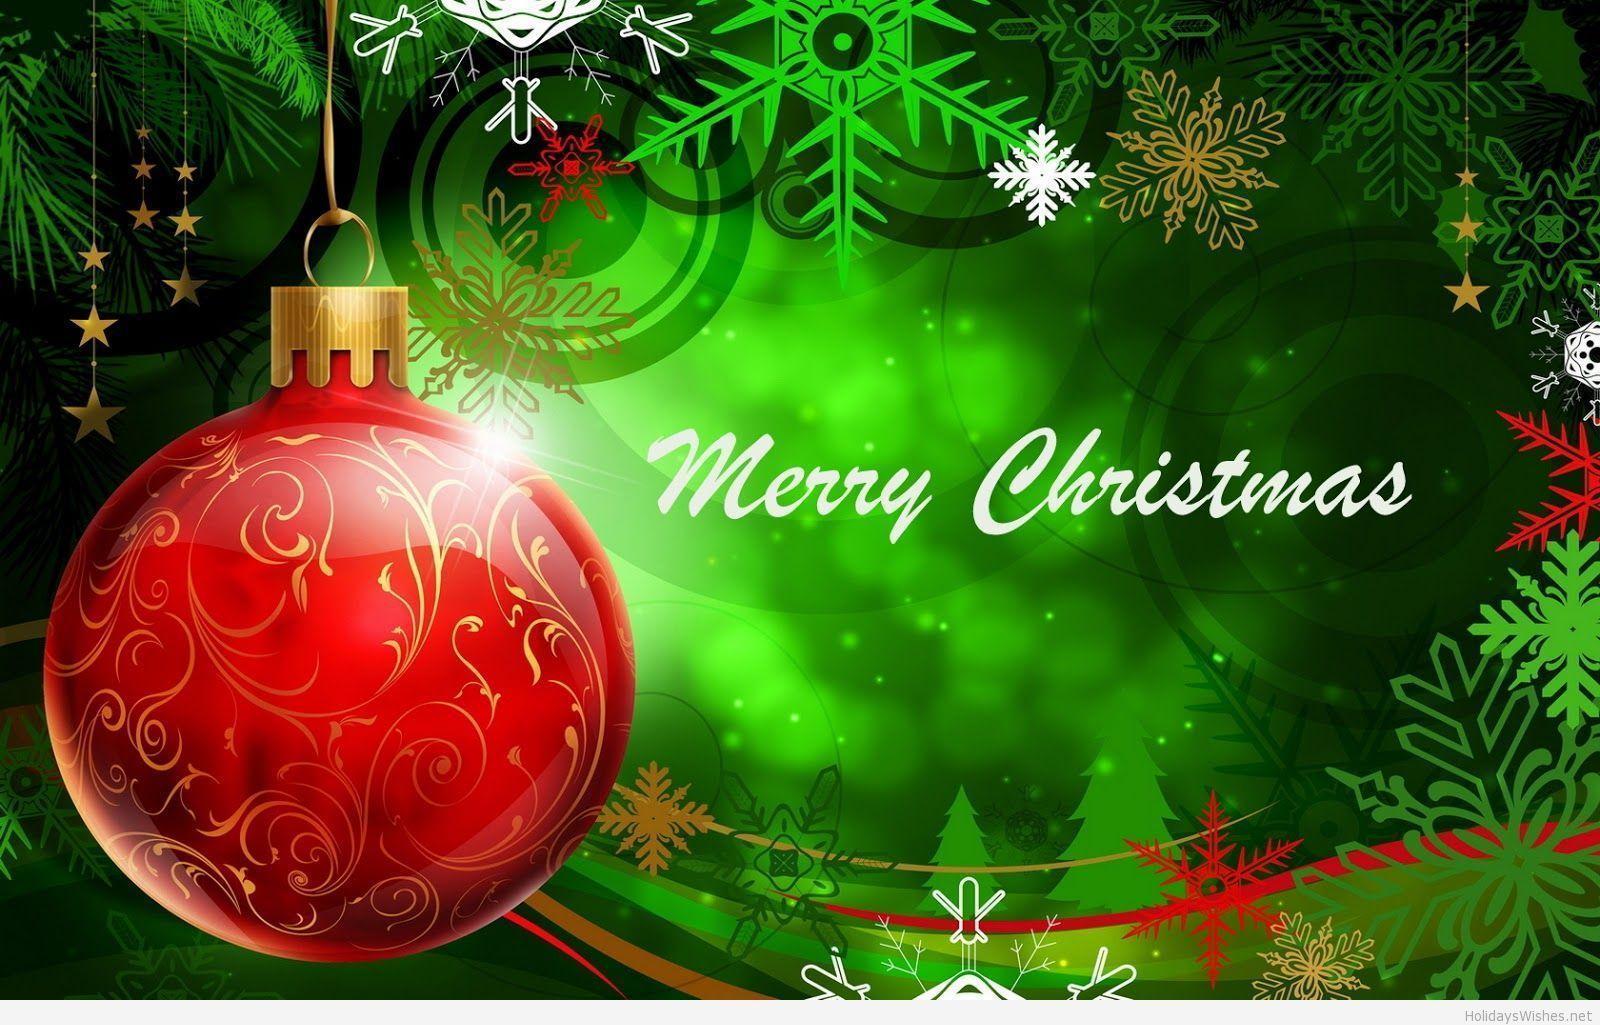 Merry Christmas Hd Wallpaper Download Merry Christmas Tree Free Download Wallpaper Bodksawasusa 6938